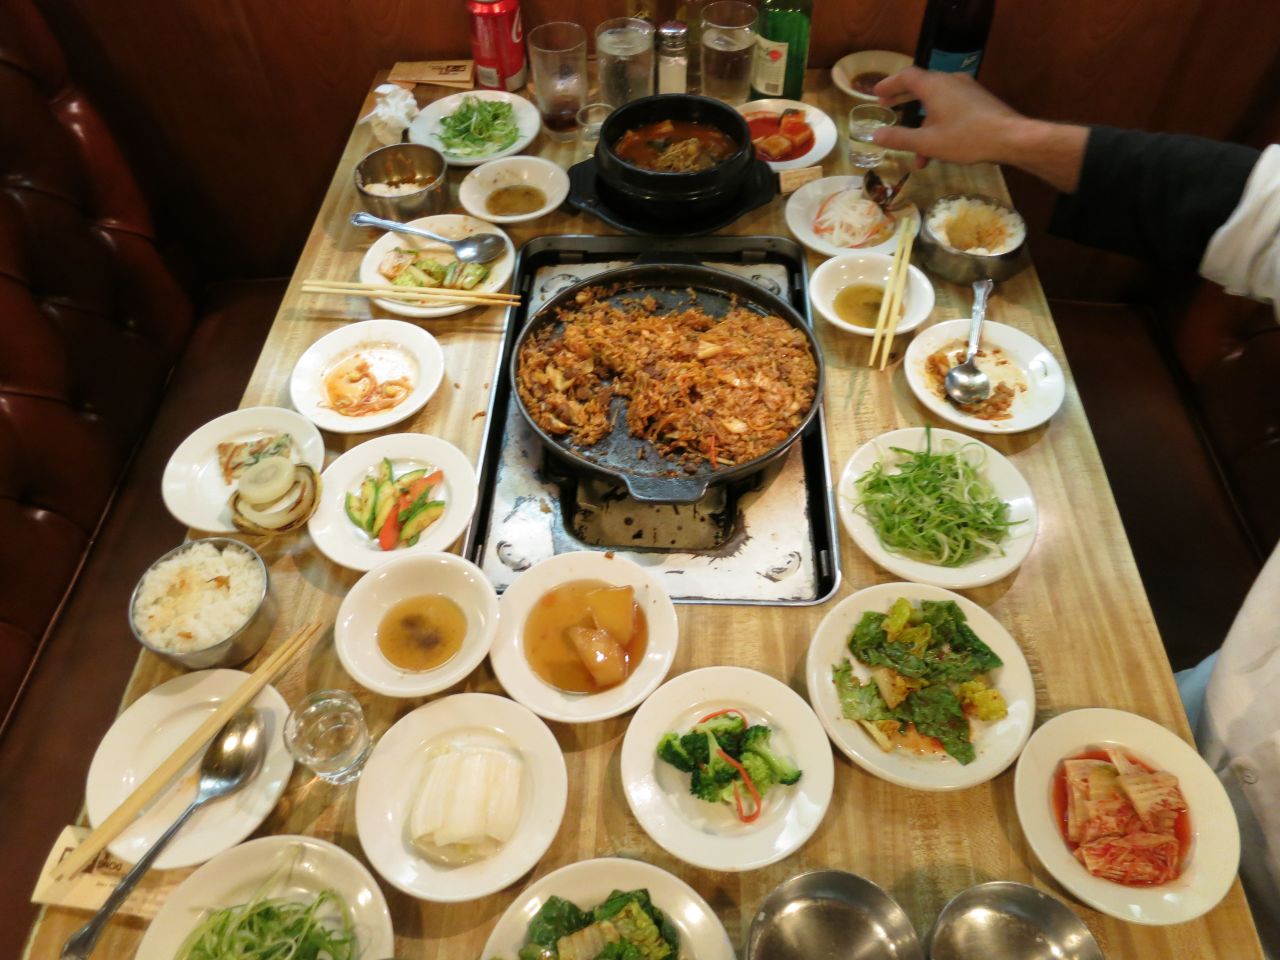 Dong Il Jang is also known for its kimchi fried rice, made in the pan after the roast gui has been cooked.